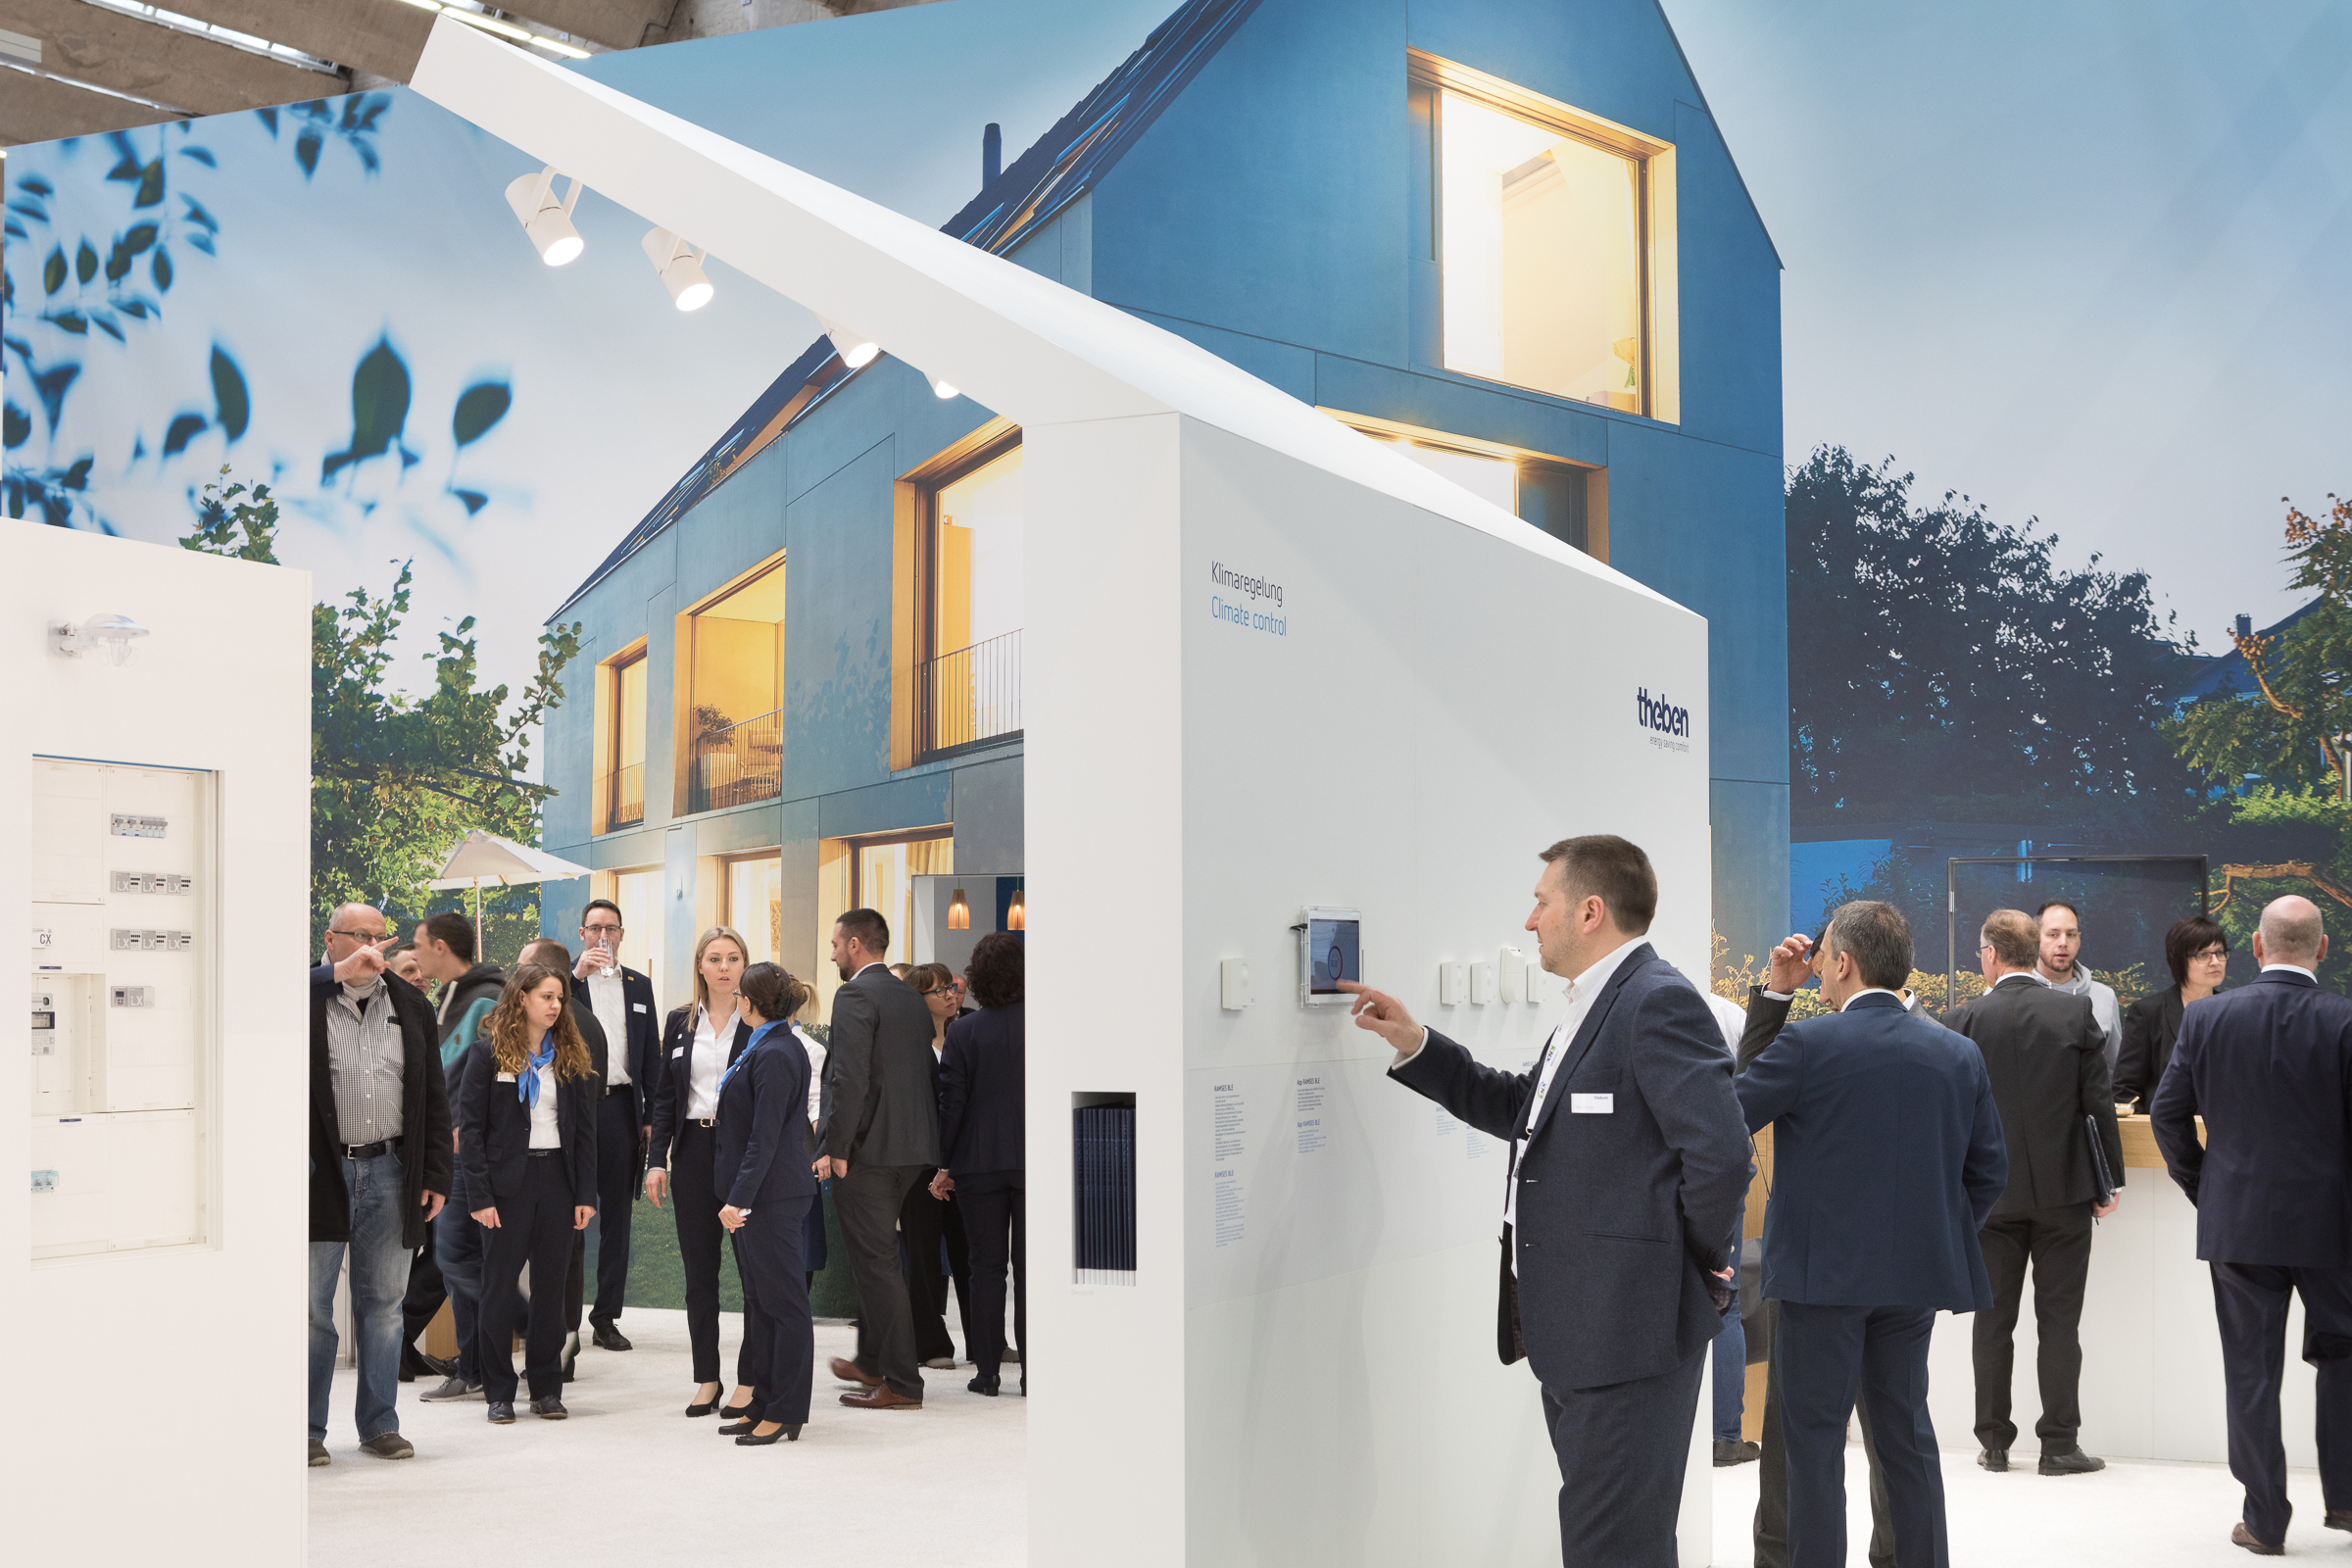 Messe Frankfurt – the place to be for building technology: international, cross-sector, trendsetting (Source: Messe Frankfurt Exhibition GmbH / P. Sutera 2018)